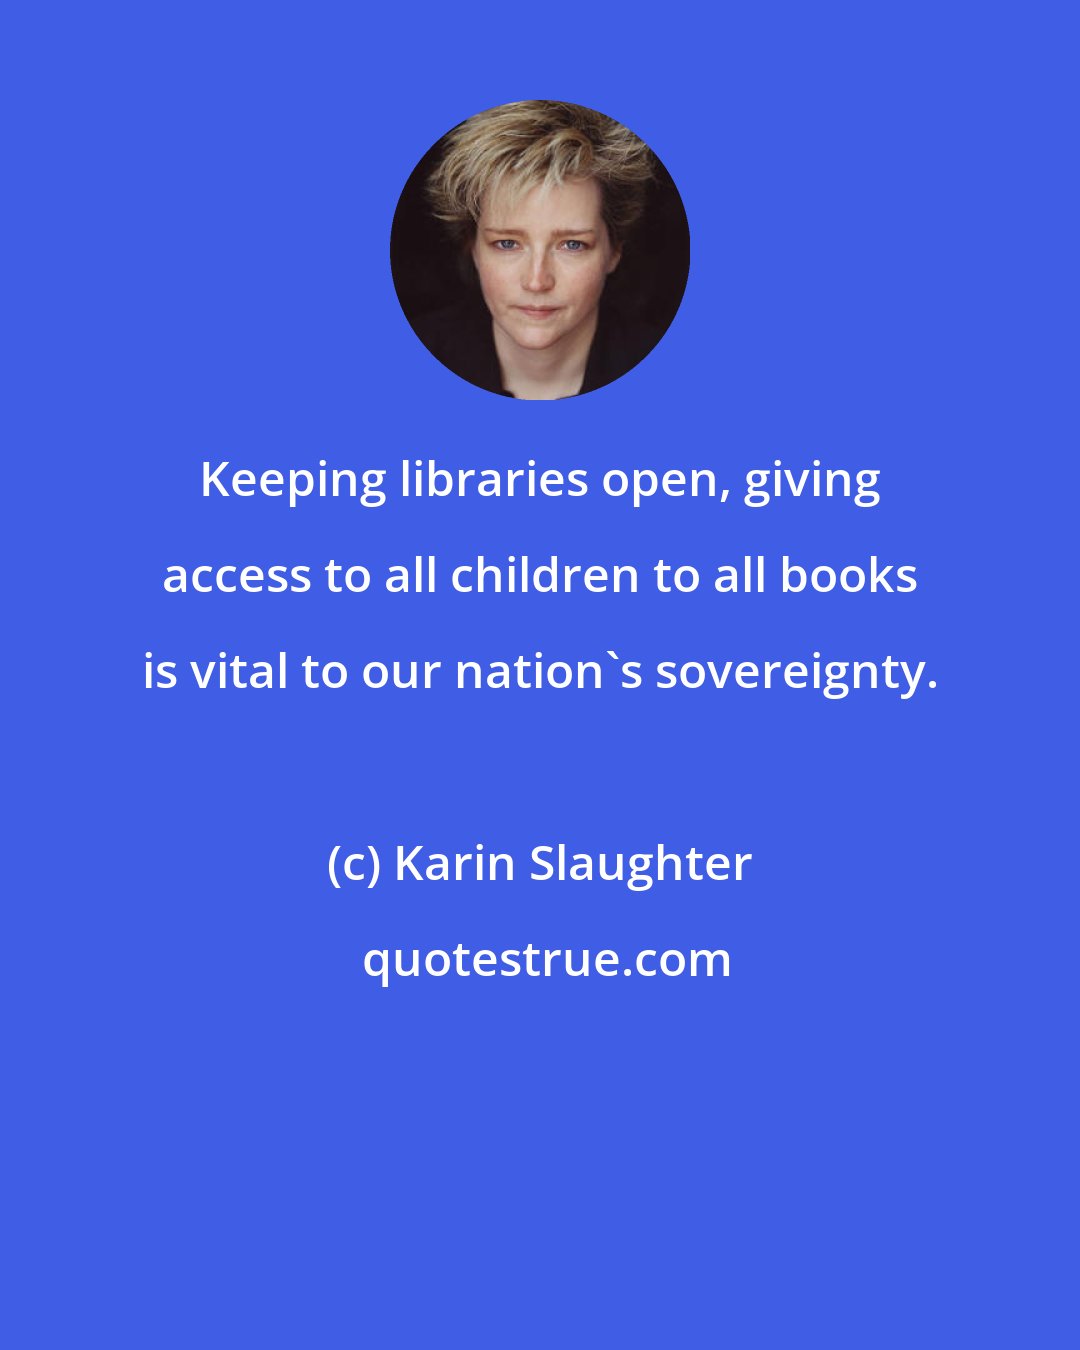 Karin Slaughter: Keeping libraries open, giving access to all children to all books is vital to our nation's sovereignty.